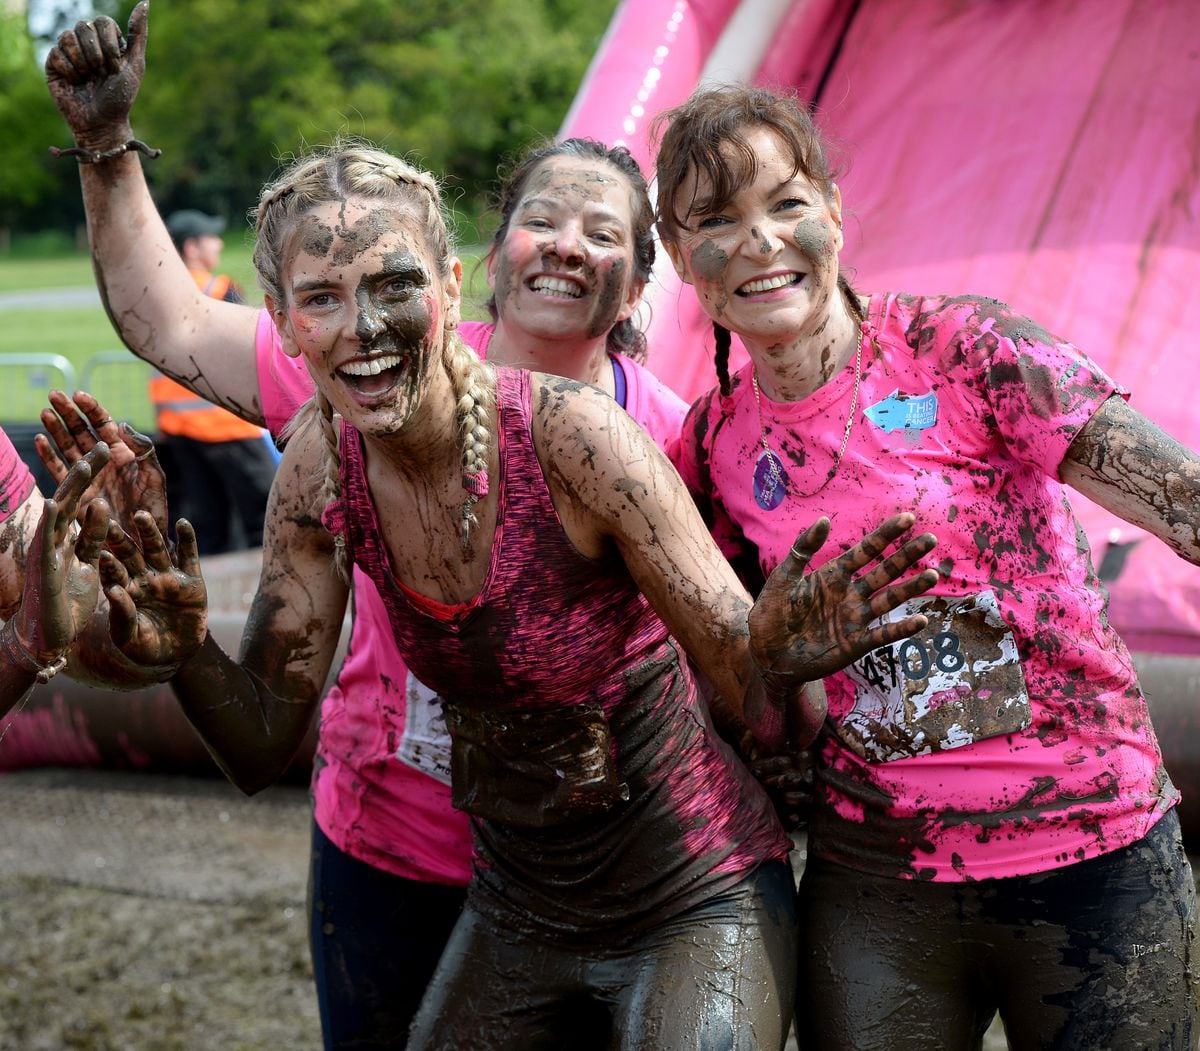 Women get 'Pretty Muddy' at Weston Park charity event - with video and ...